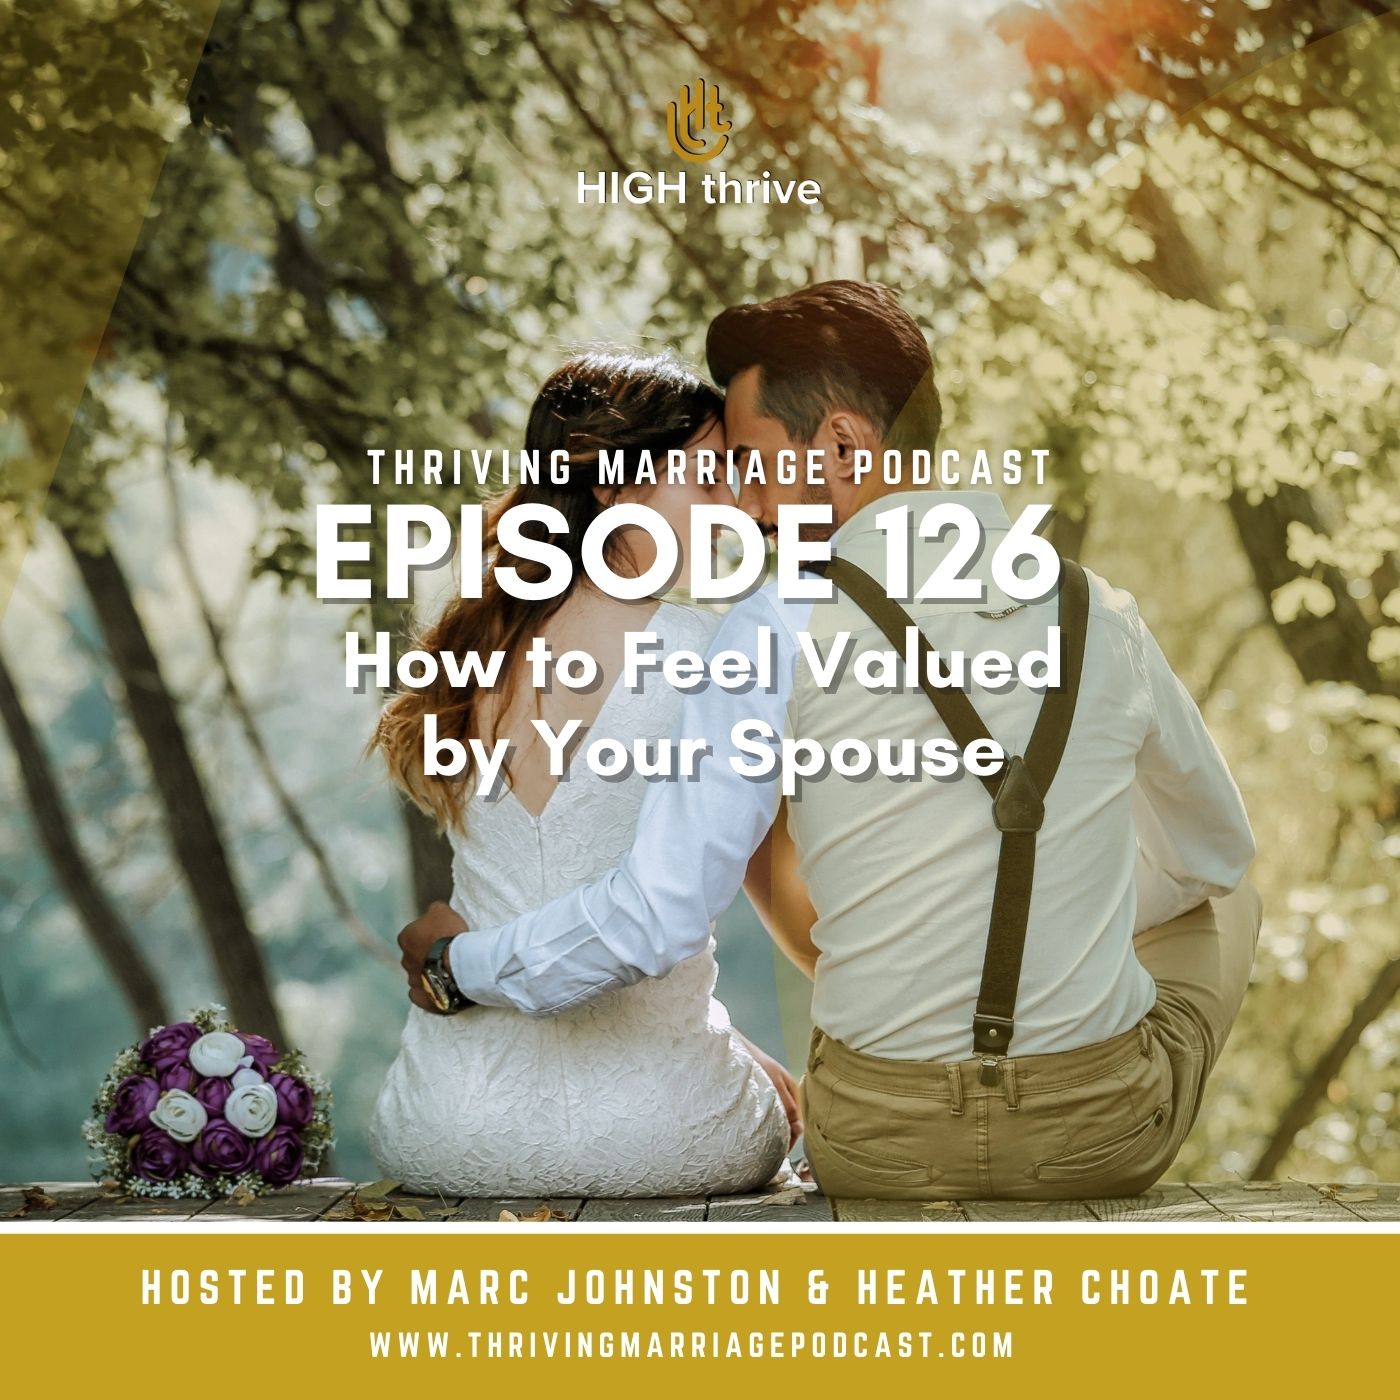 Episode 126: How to Feel Valued by Your Spouse